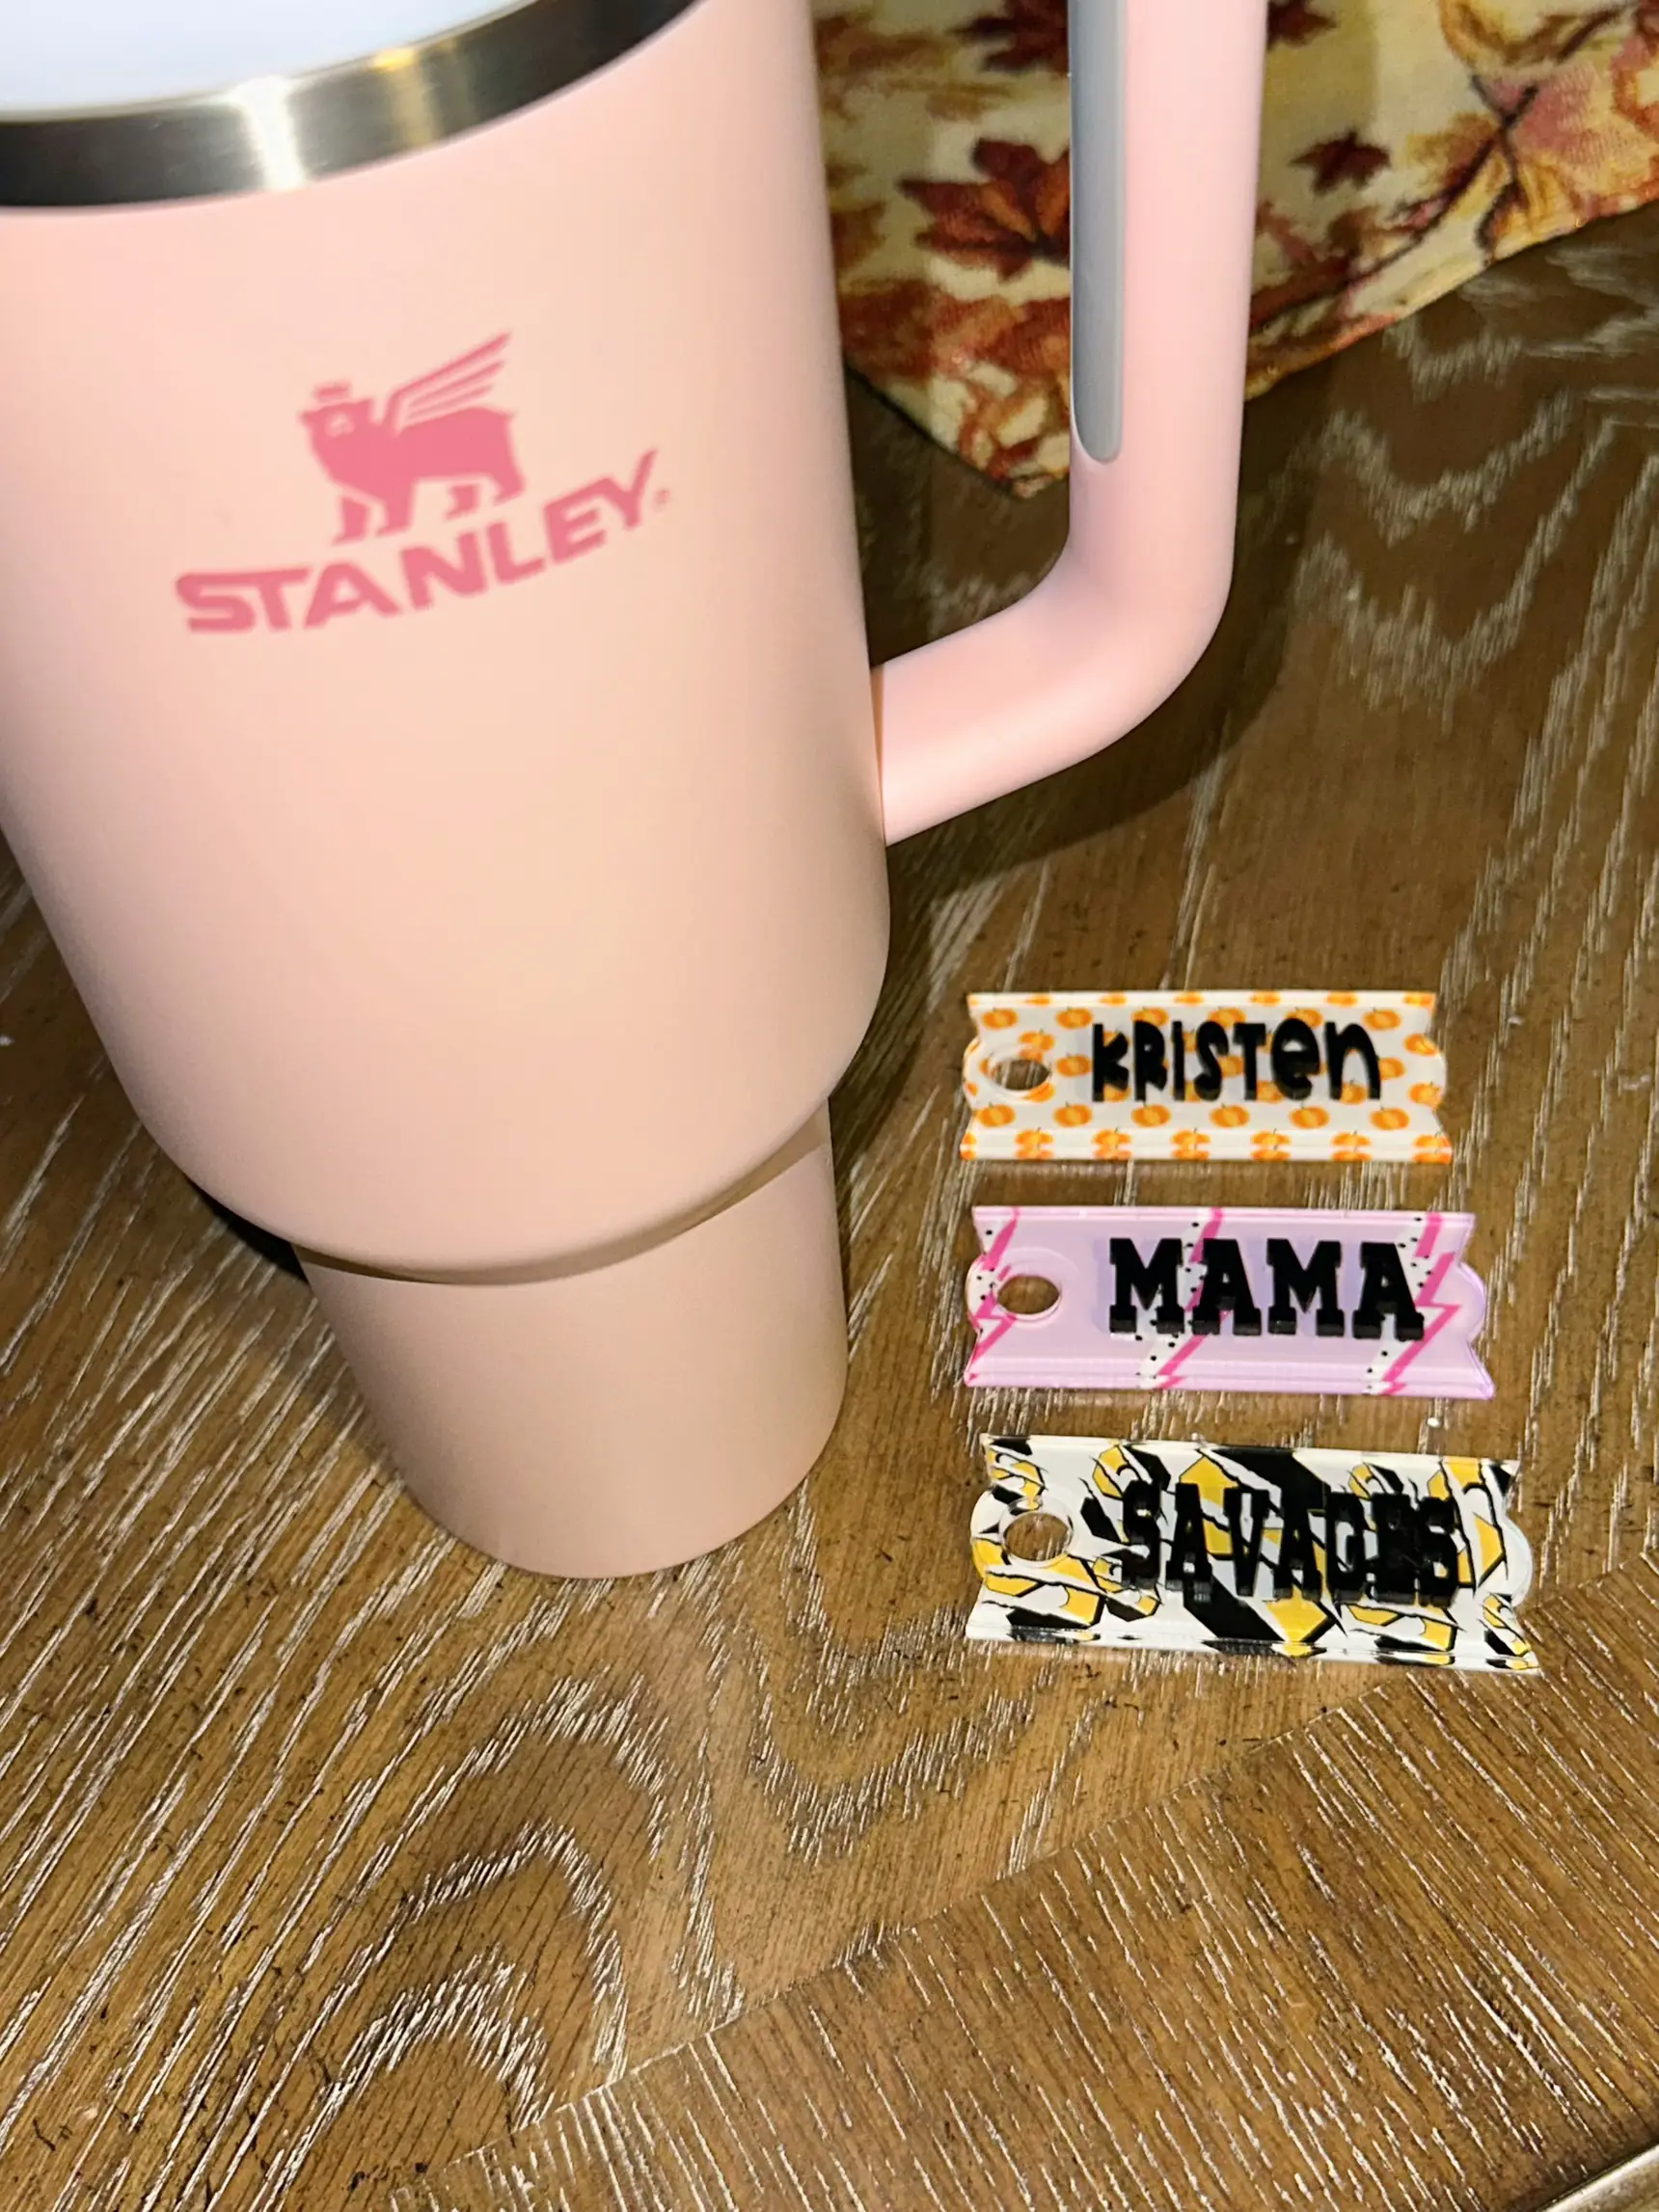 personalized Stanley toppers - Lemon8 Search